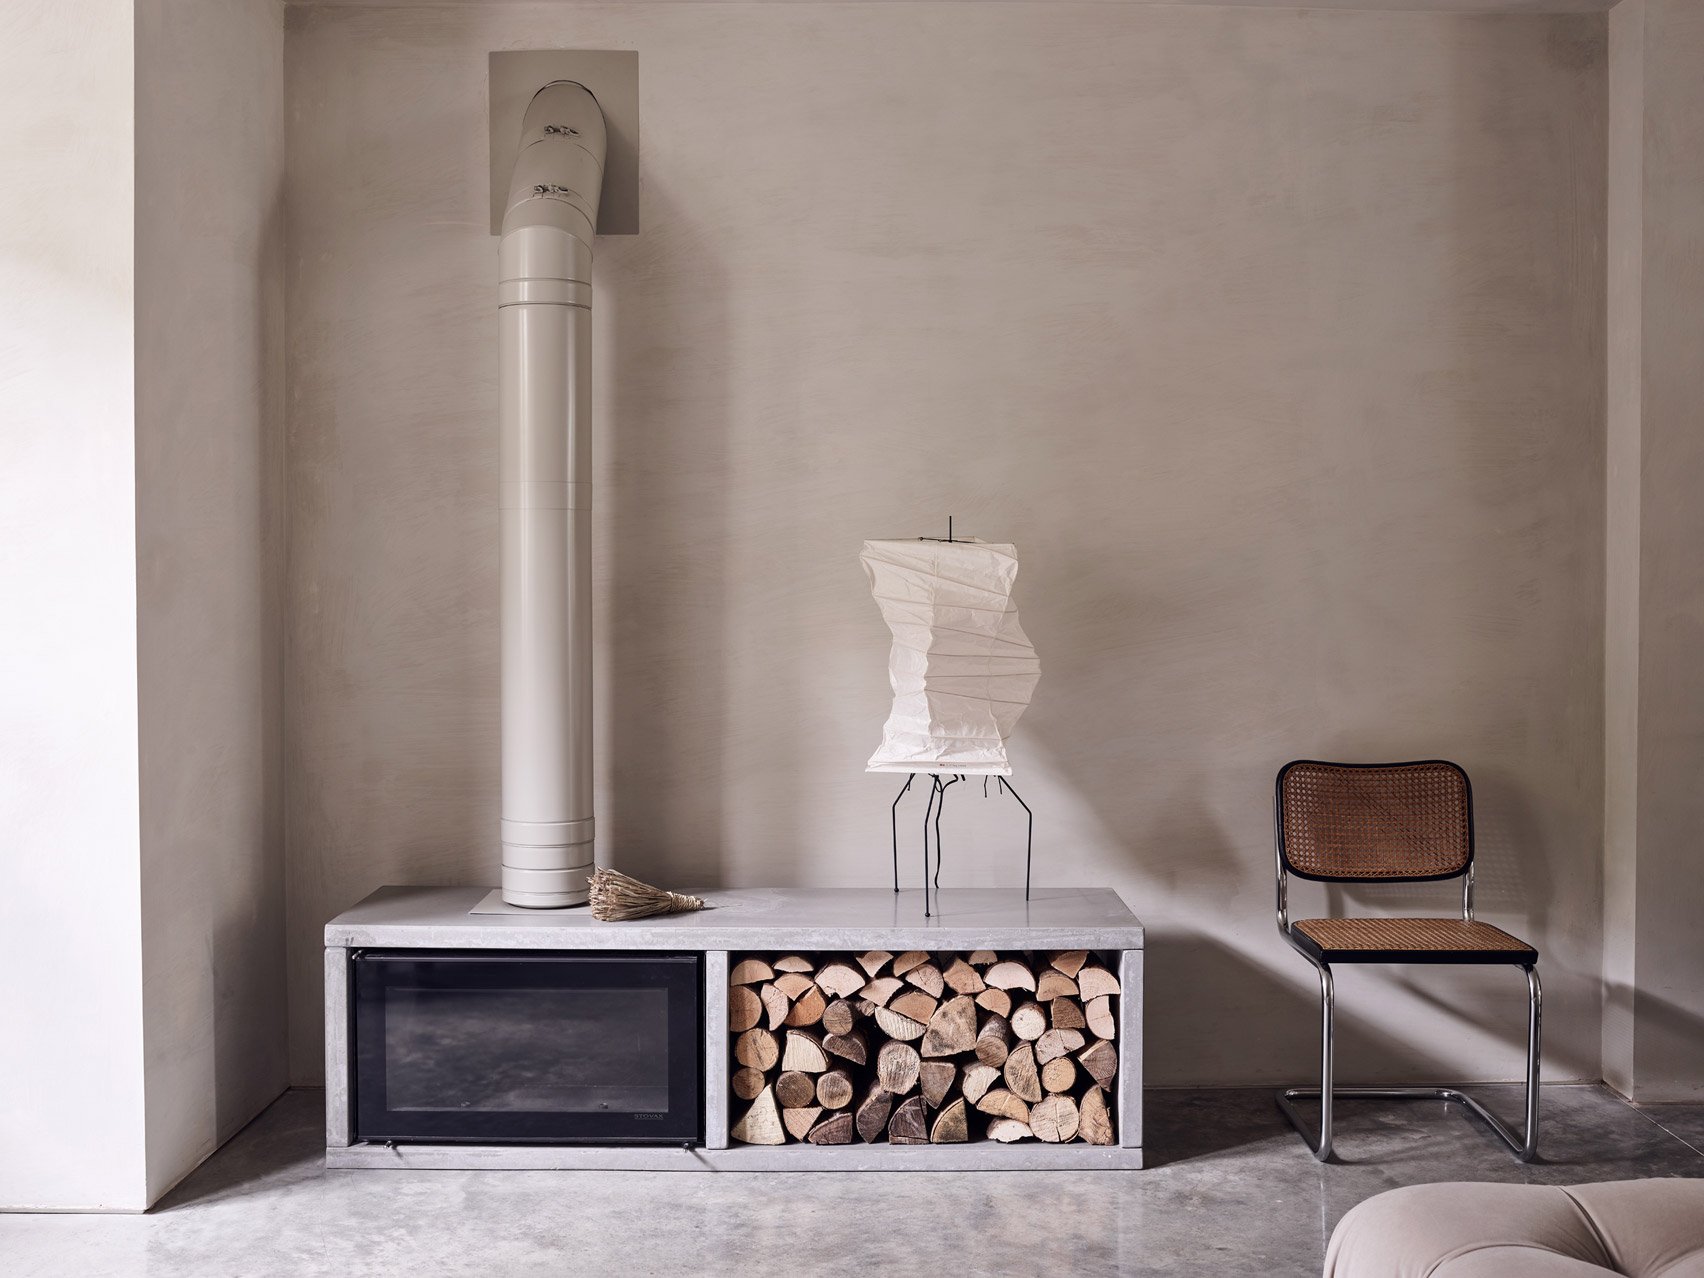 Paper lamp on a fireplace